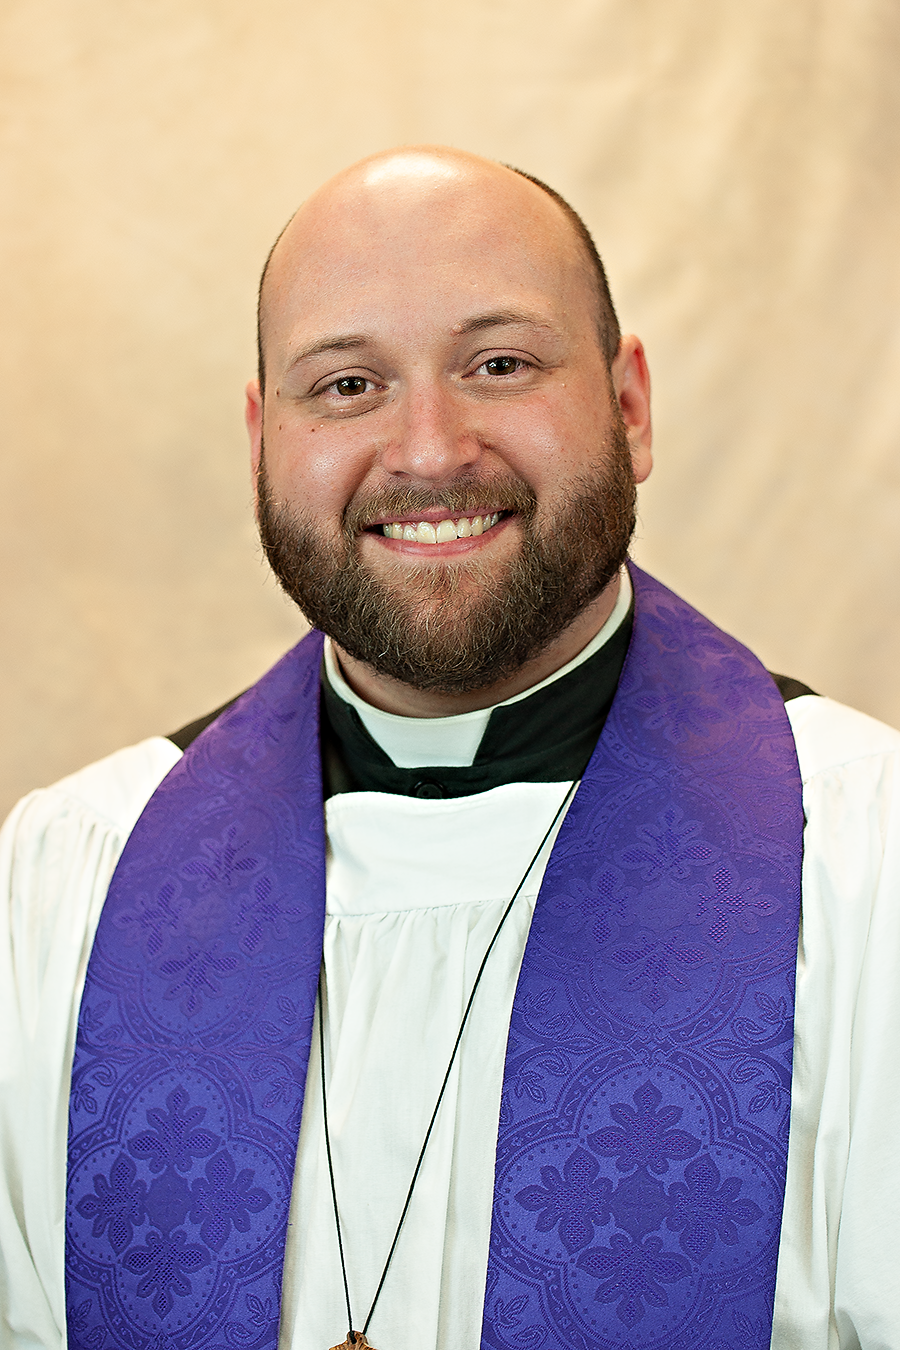 Reverend Bruce Gowe wearing priestly vestments in white and purple.